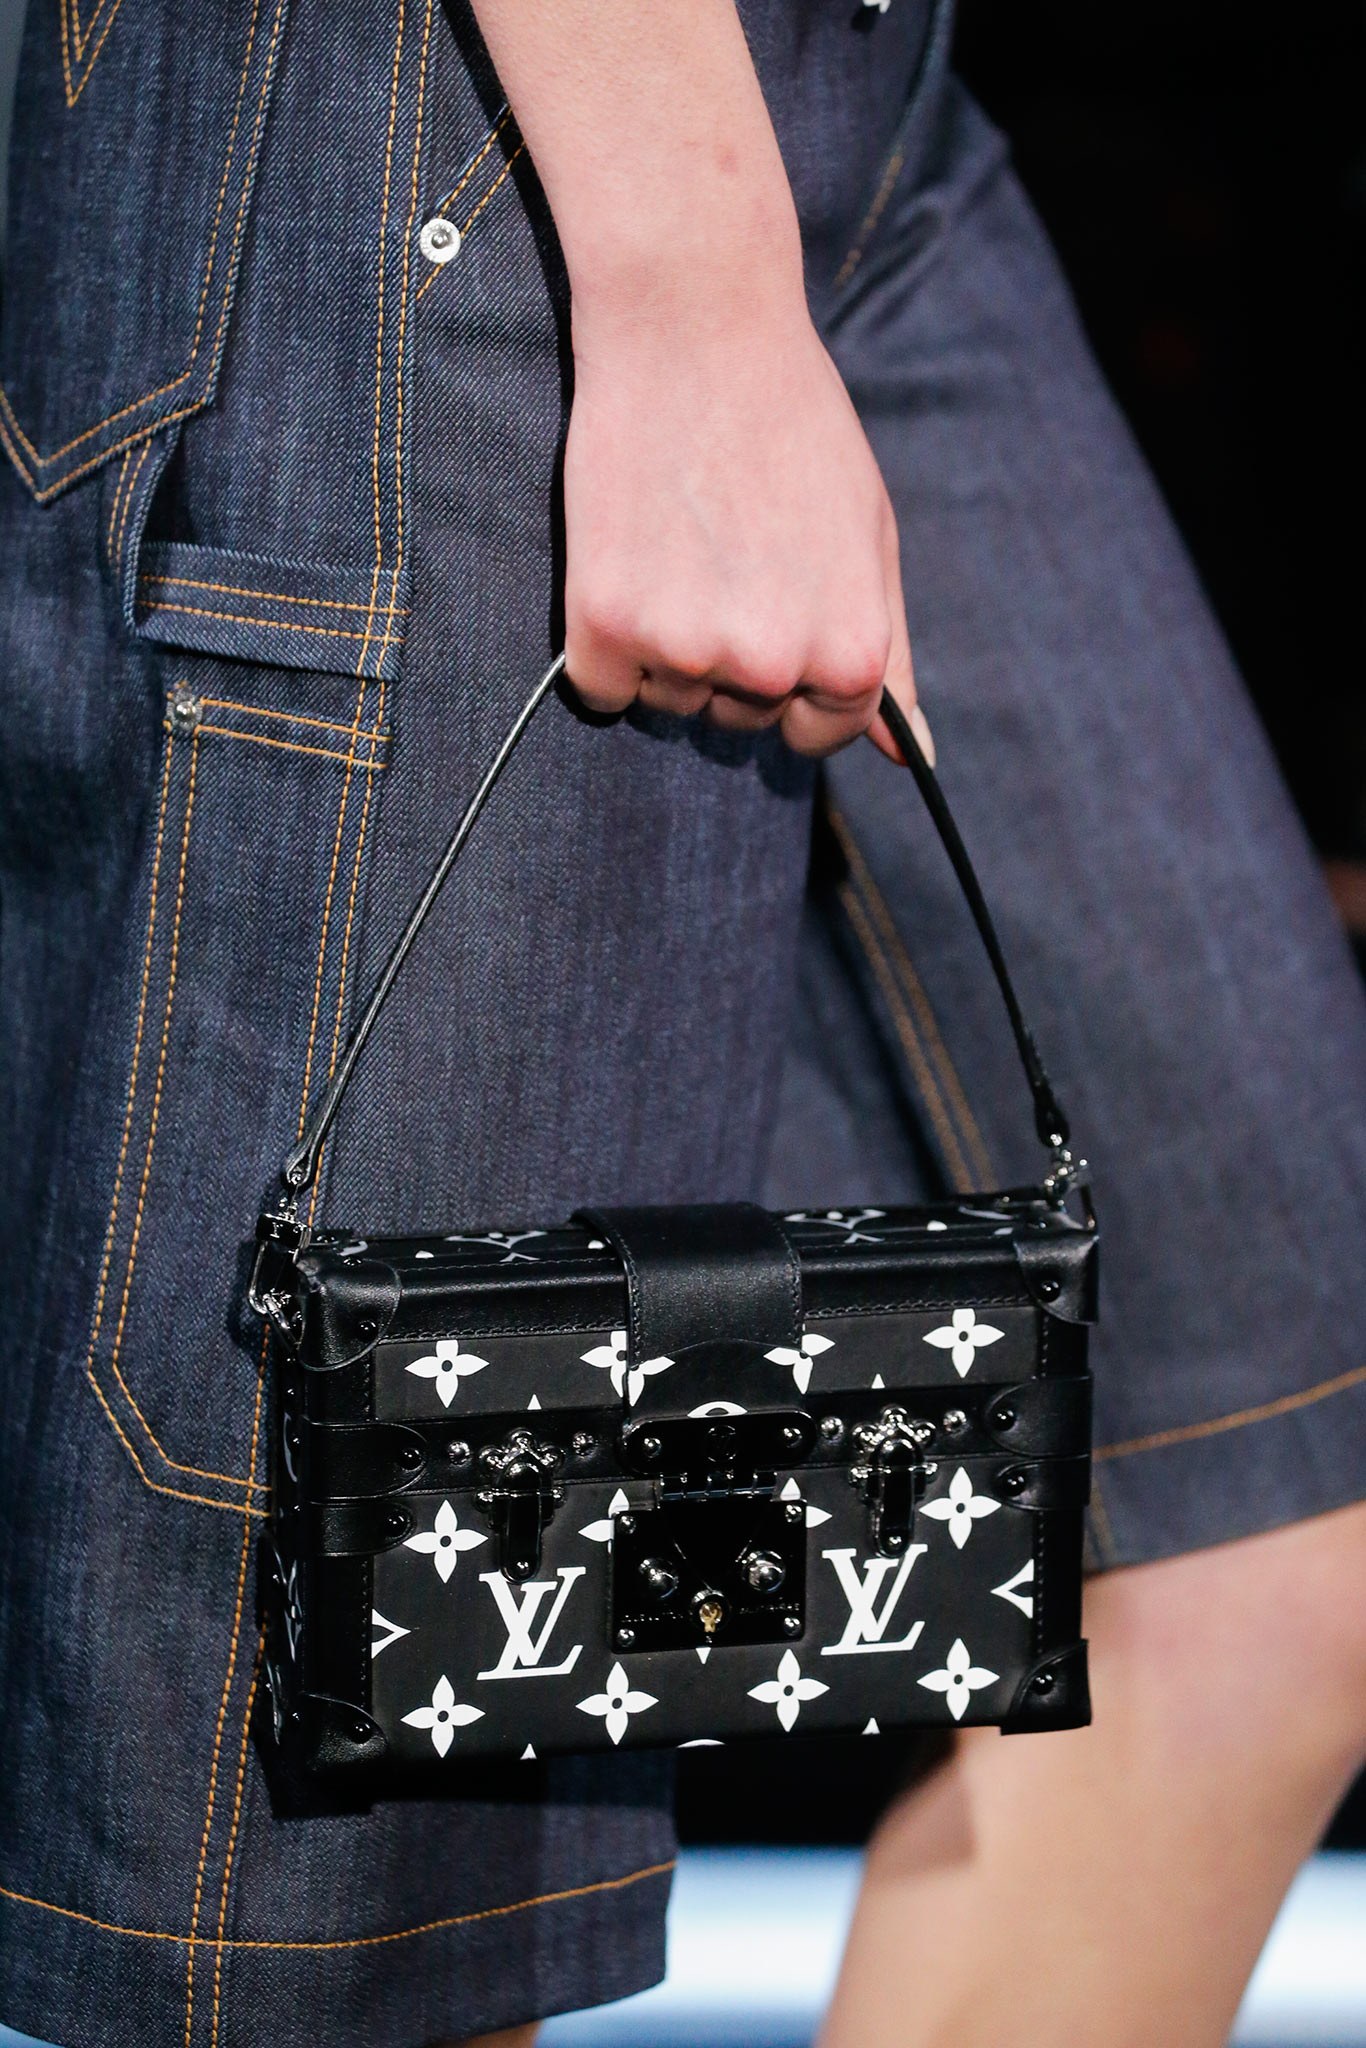 Louis Vuitton Petite Malle from Resort 2015 - BagAddicts Anonymous